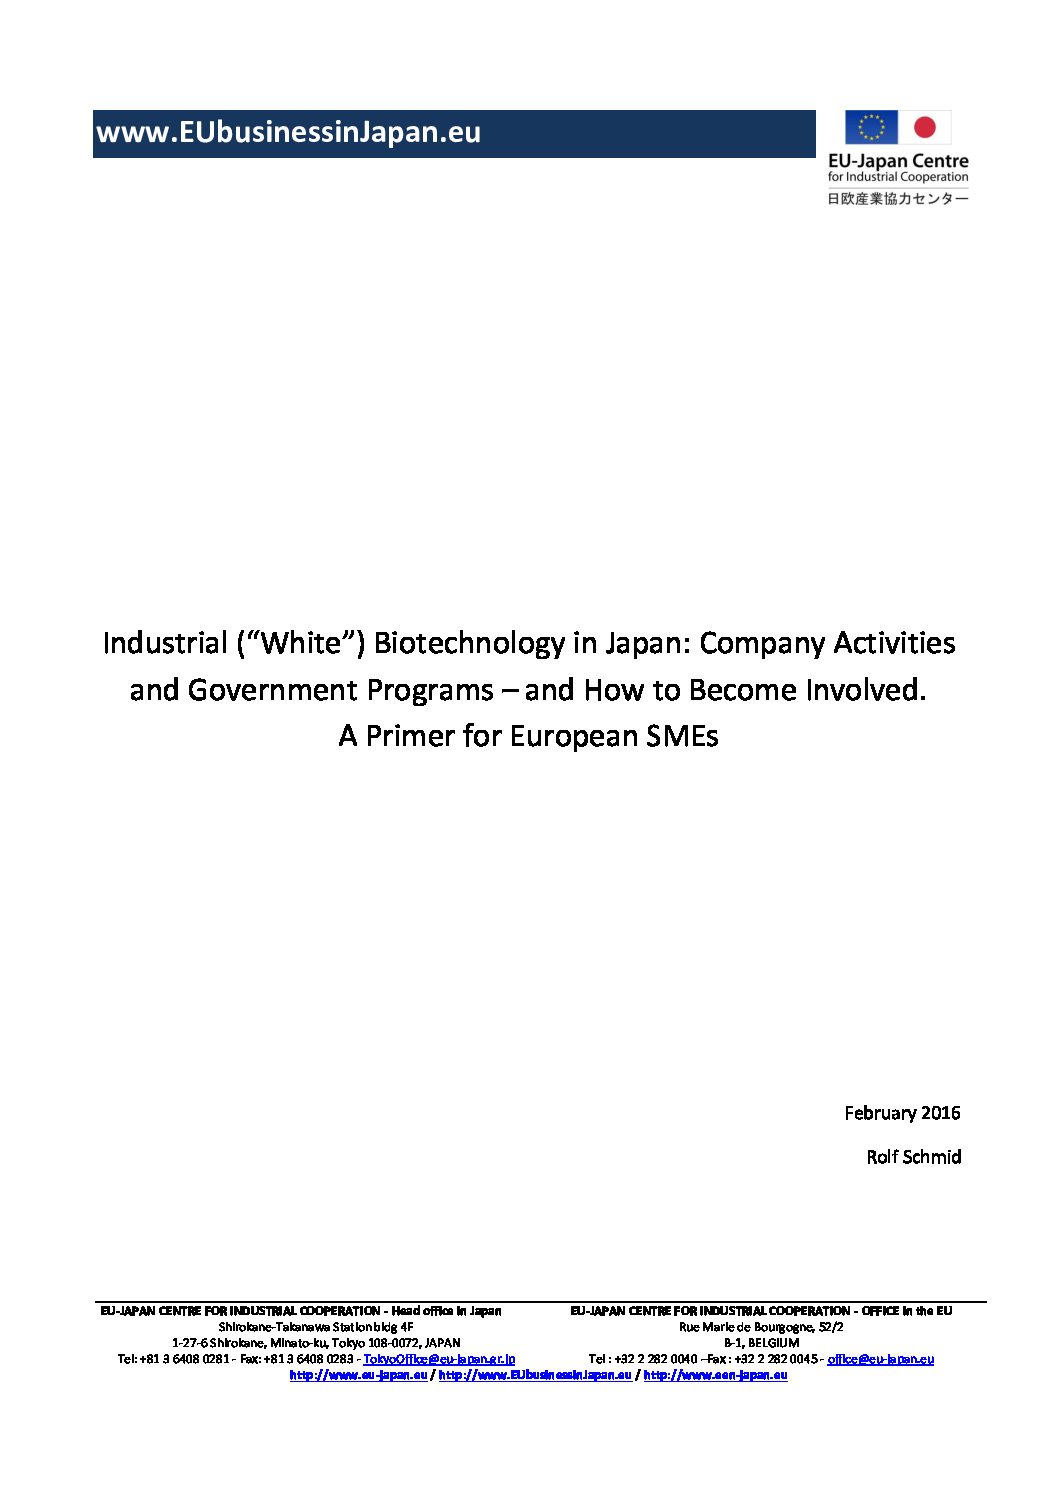 Industrial (“White”) Biotechnology in Japan: Company Activities and Government Programs – and How to Become Involved. A Primer for European SMEs